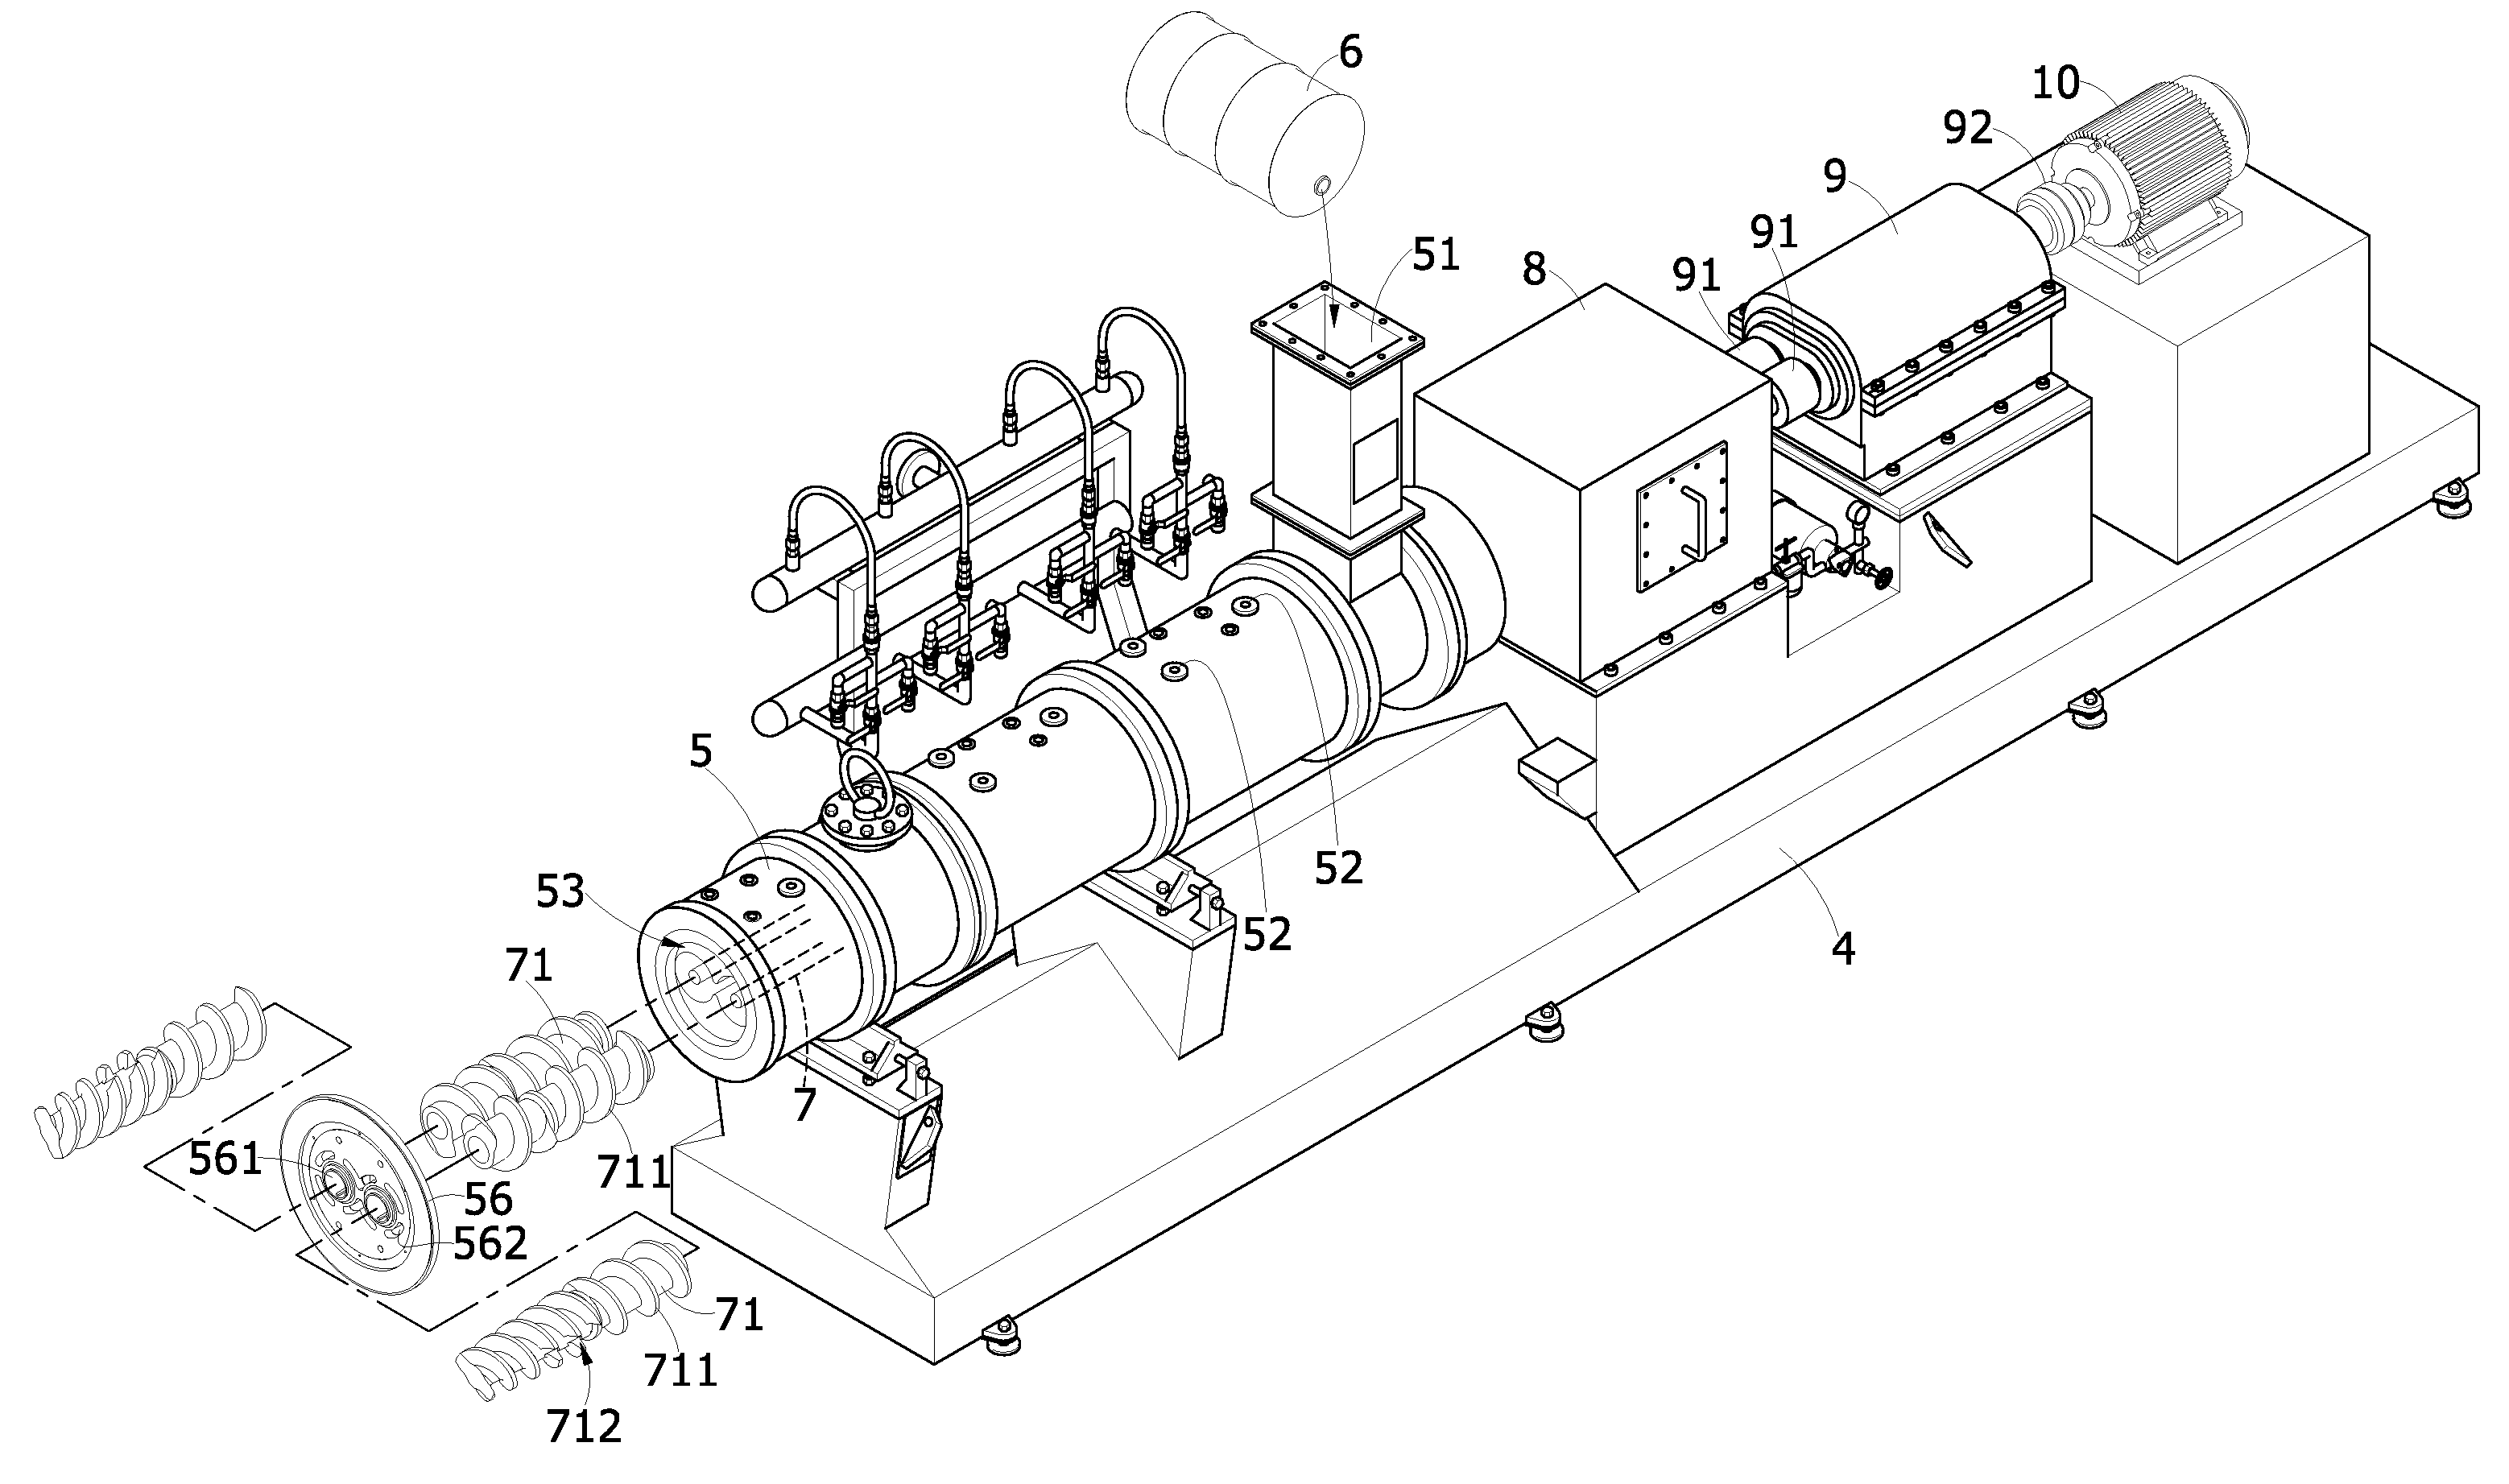 Counter-rotating twin screw extruder